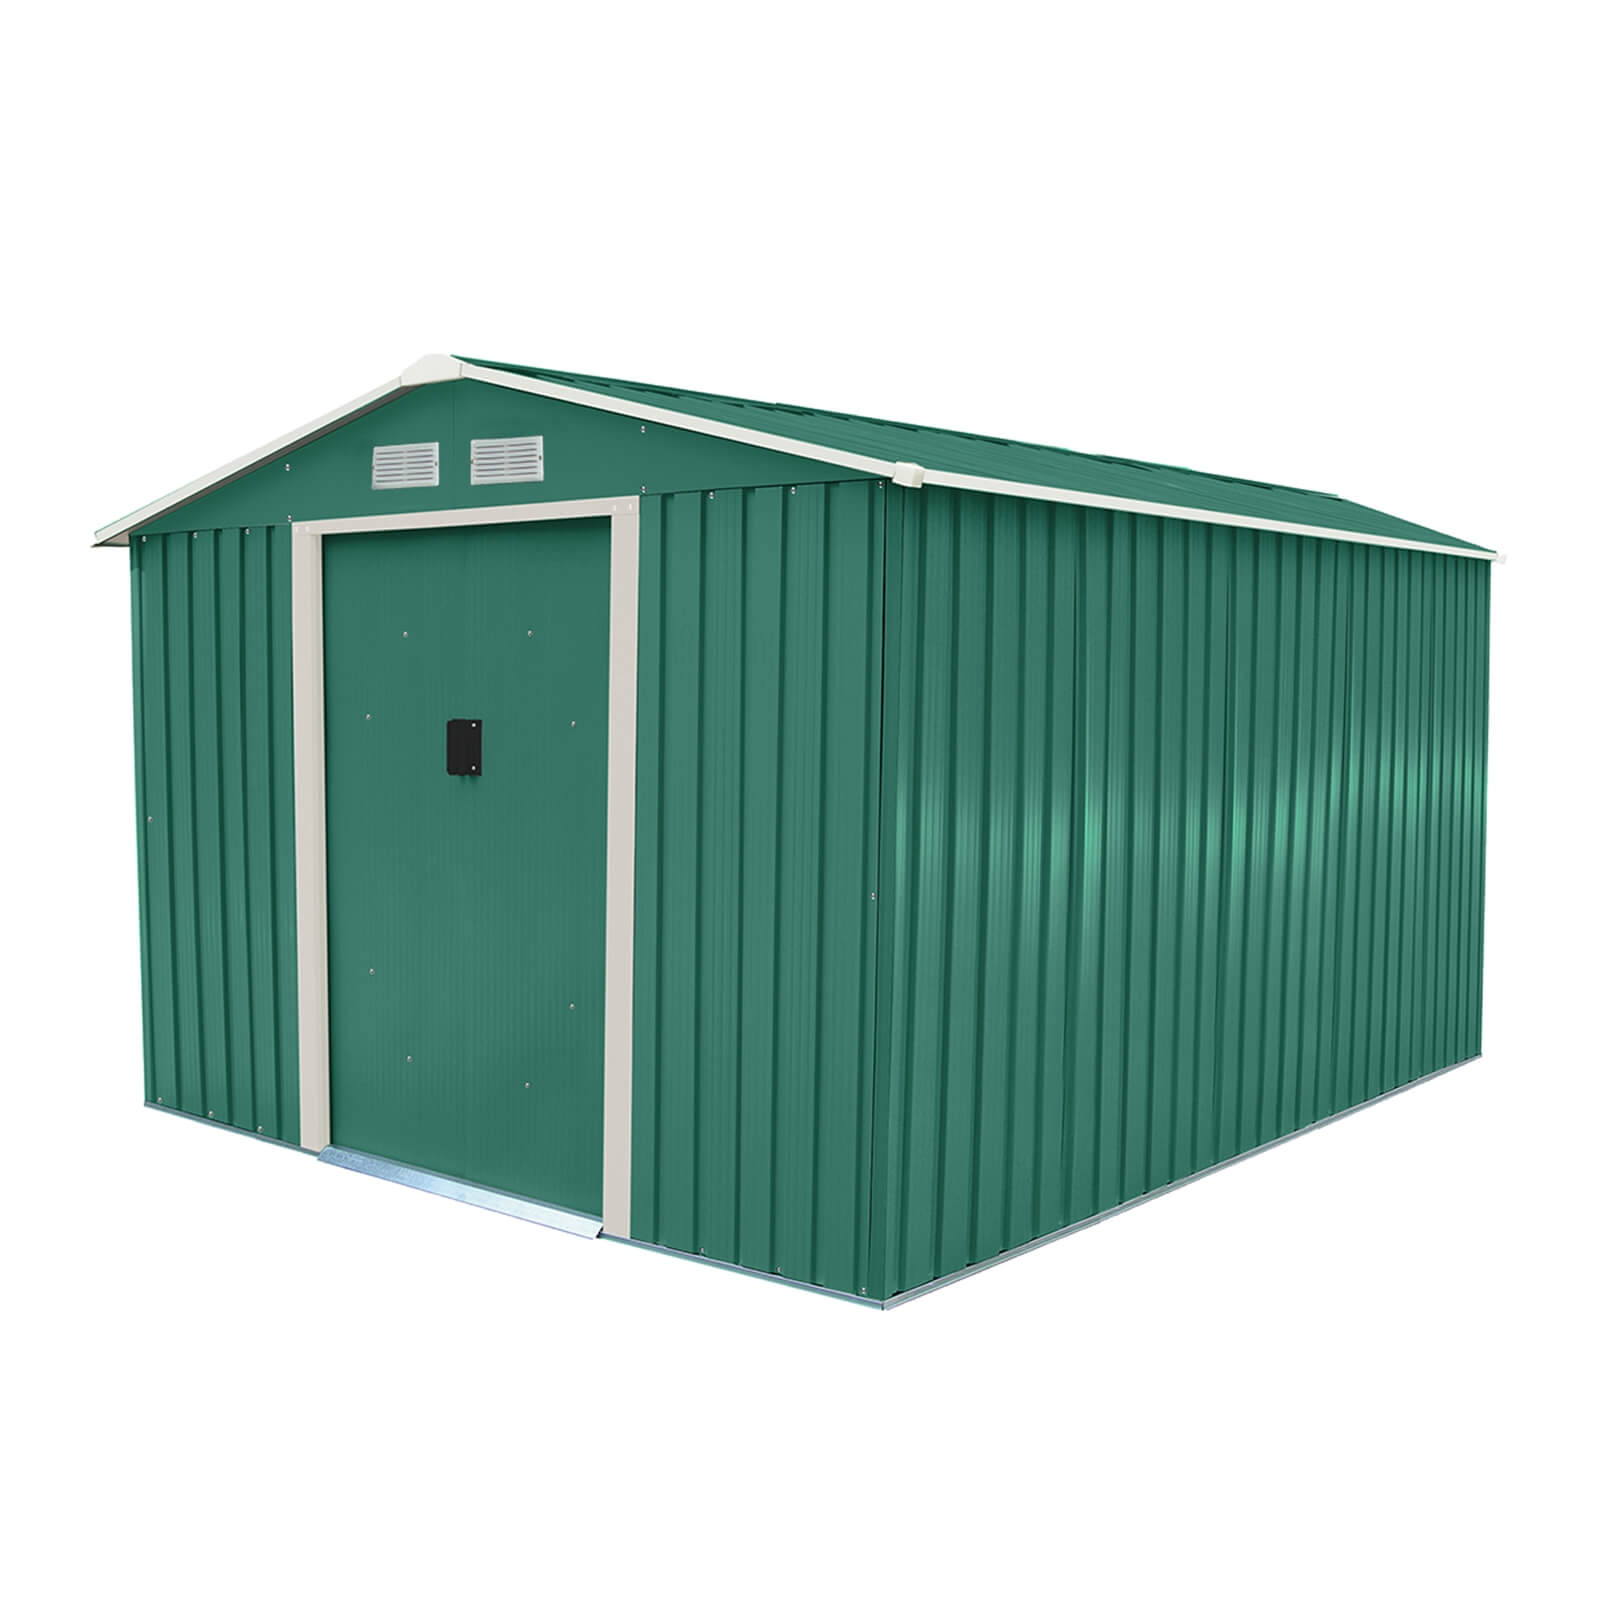 Charles Bentley 8ft x 10ft Metal Garden Shed with Floor Foundation Kit - Green